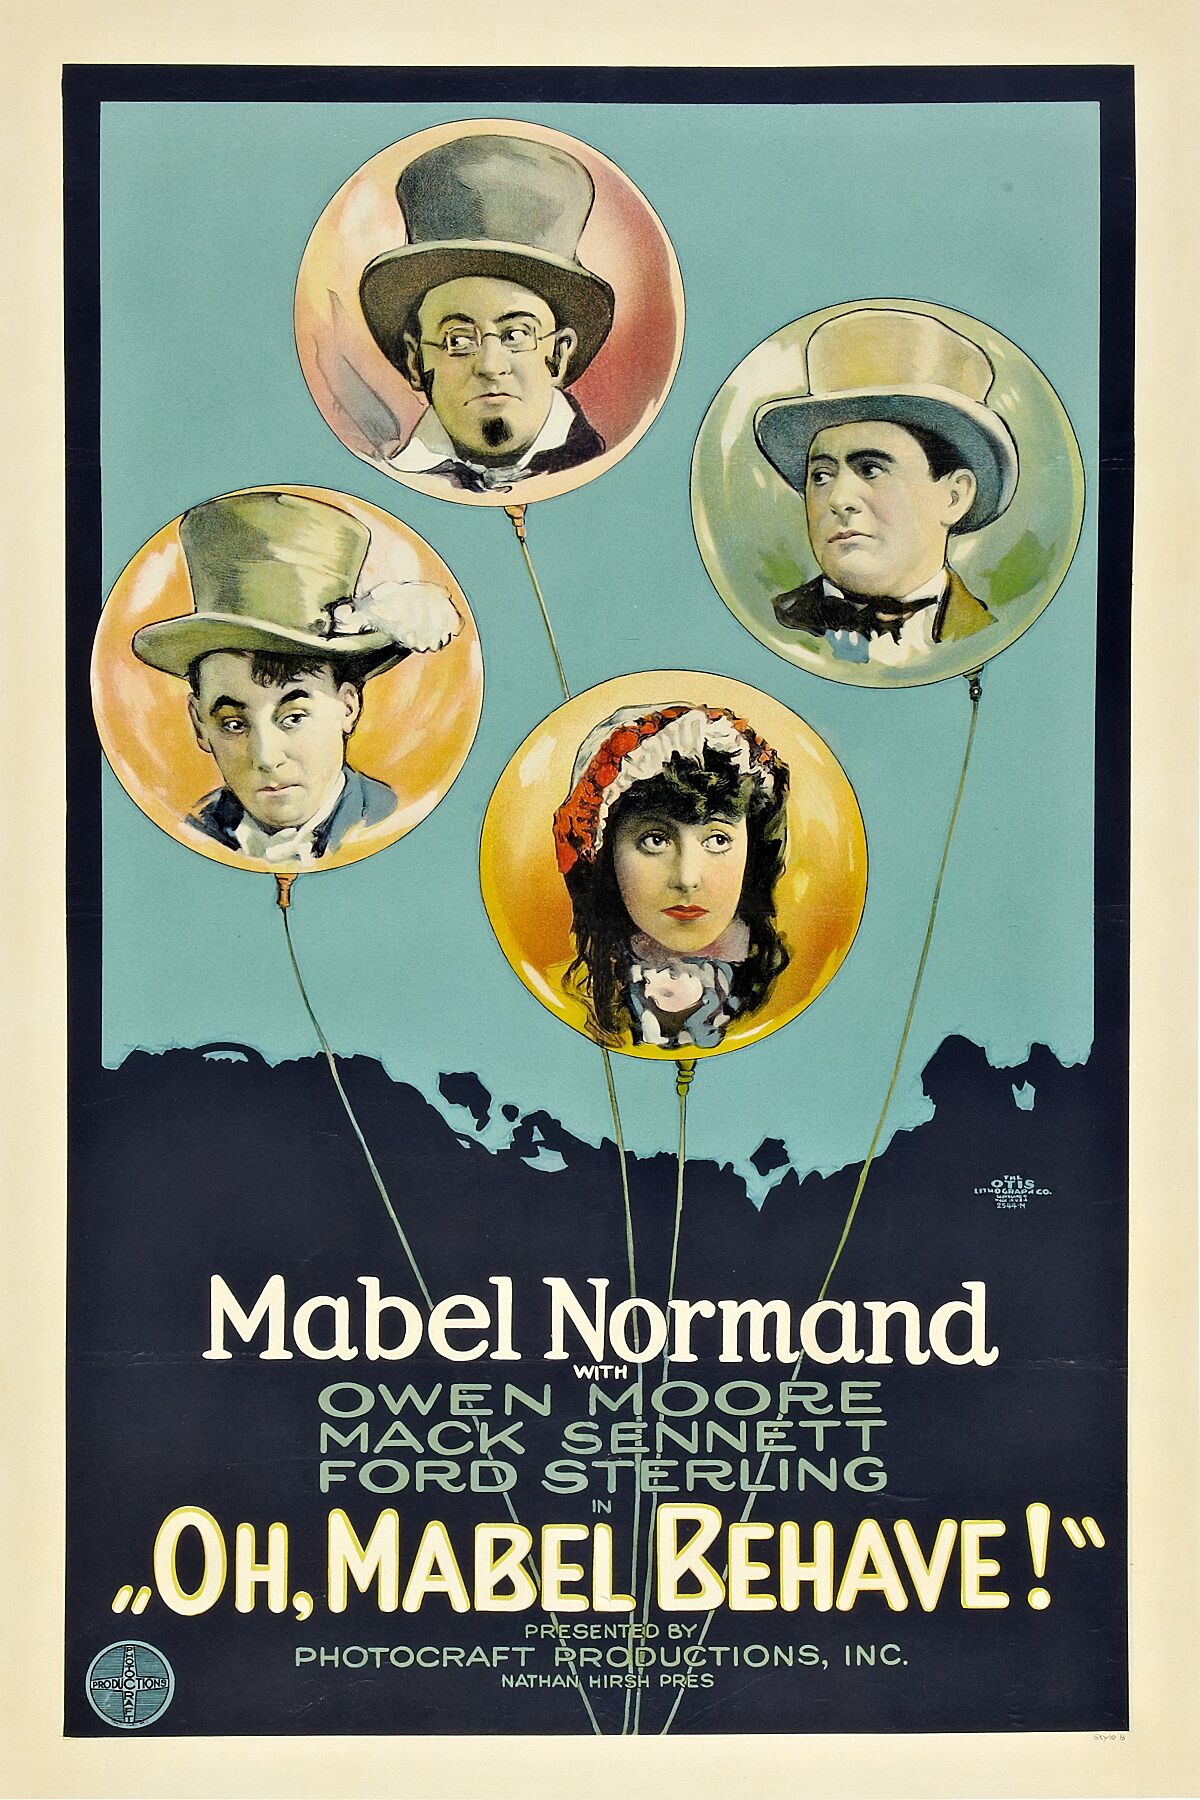 Oh, Mabel Behave - 1922 American silent comedy film starring Mabel Normand